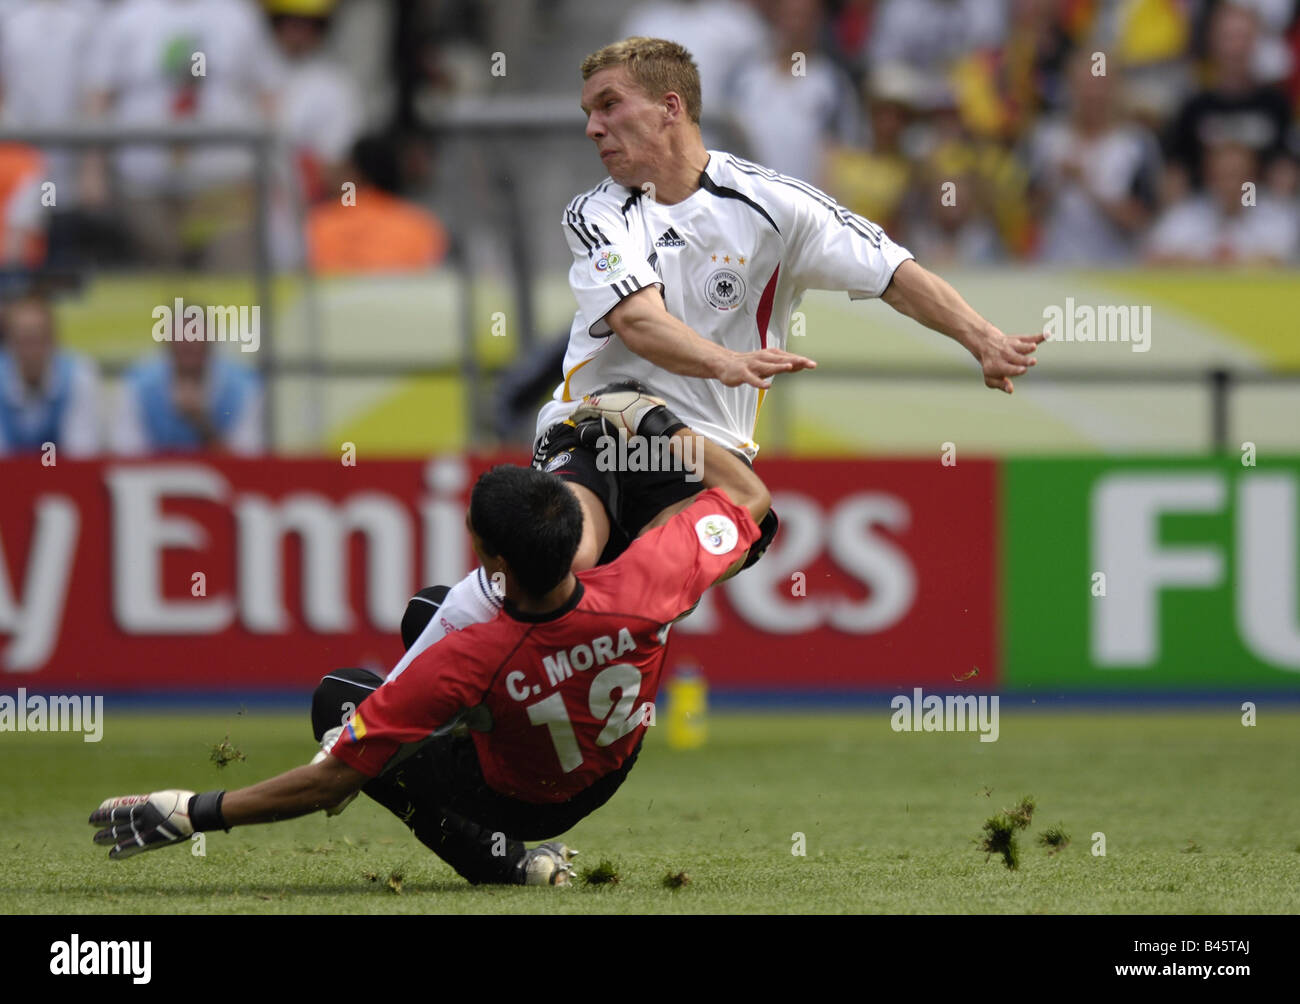 Sport, football, world championships, Ecuador versus Germany, (0:3), Berlin, 20.6.2006, Additional-Rights-Clearance-Info-Not-Available Stock Photo